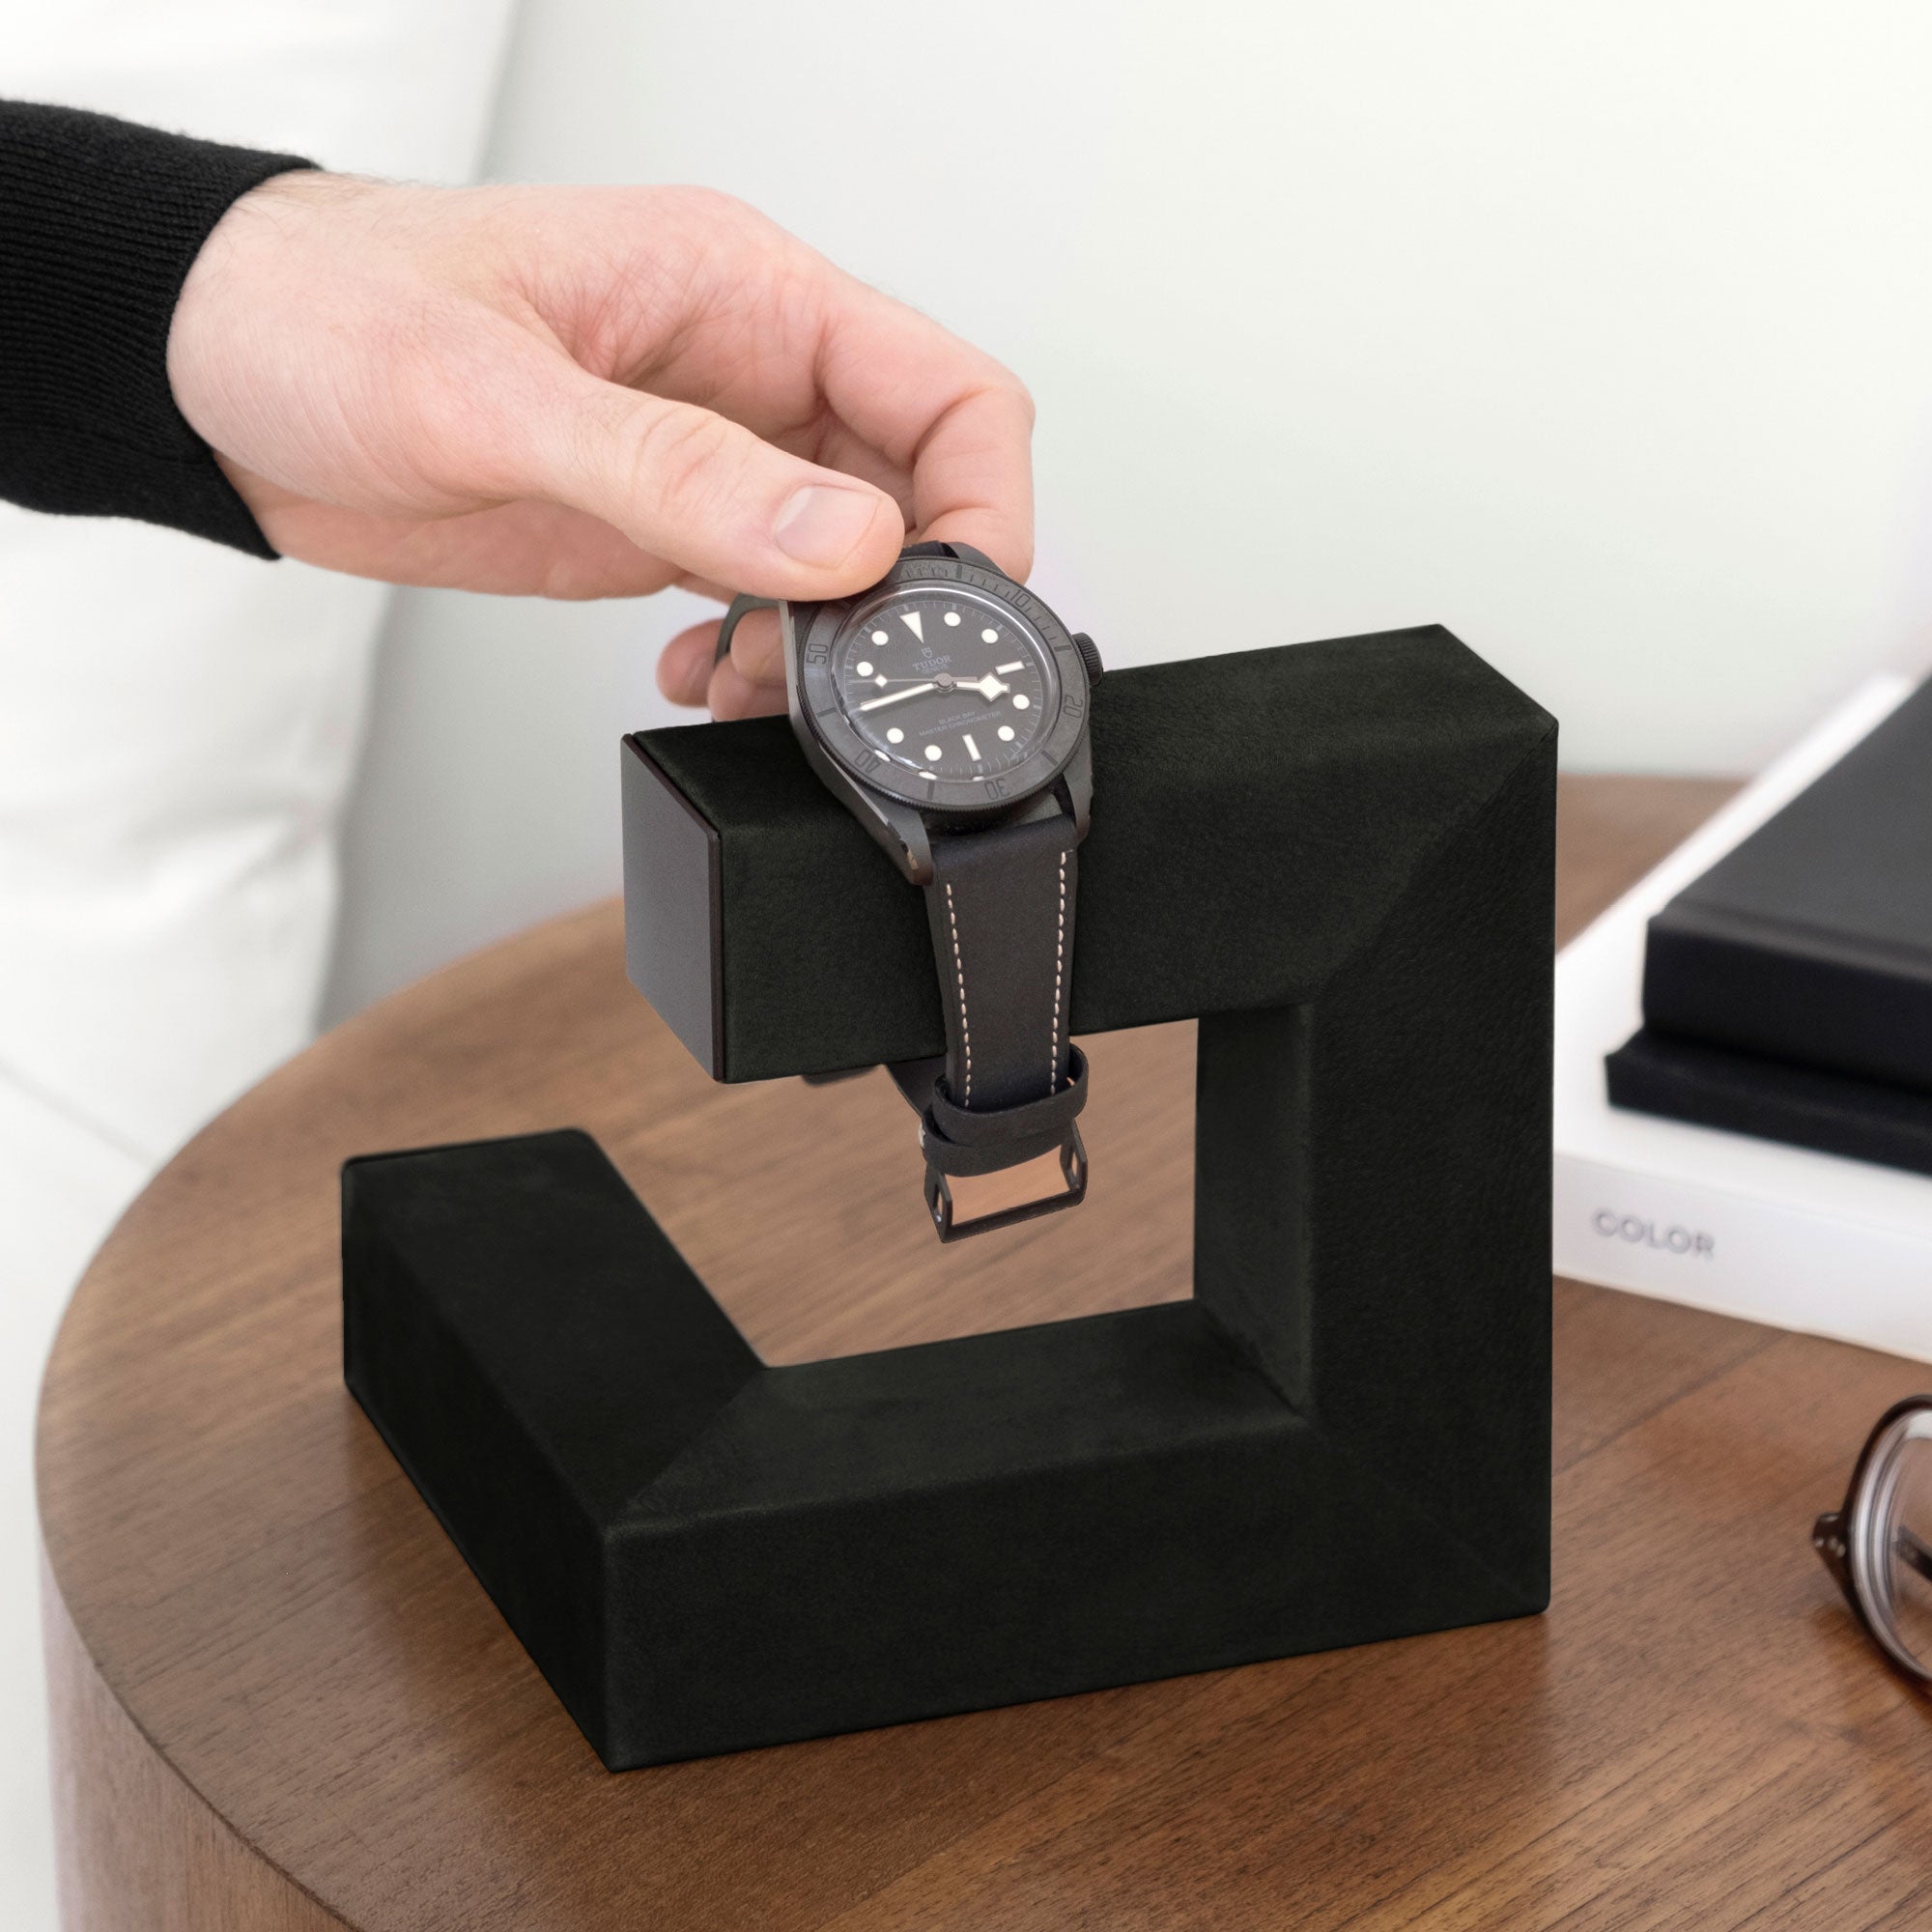 Lifestyle photo of man taking watch from all black watch stand inspired by contemporary art